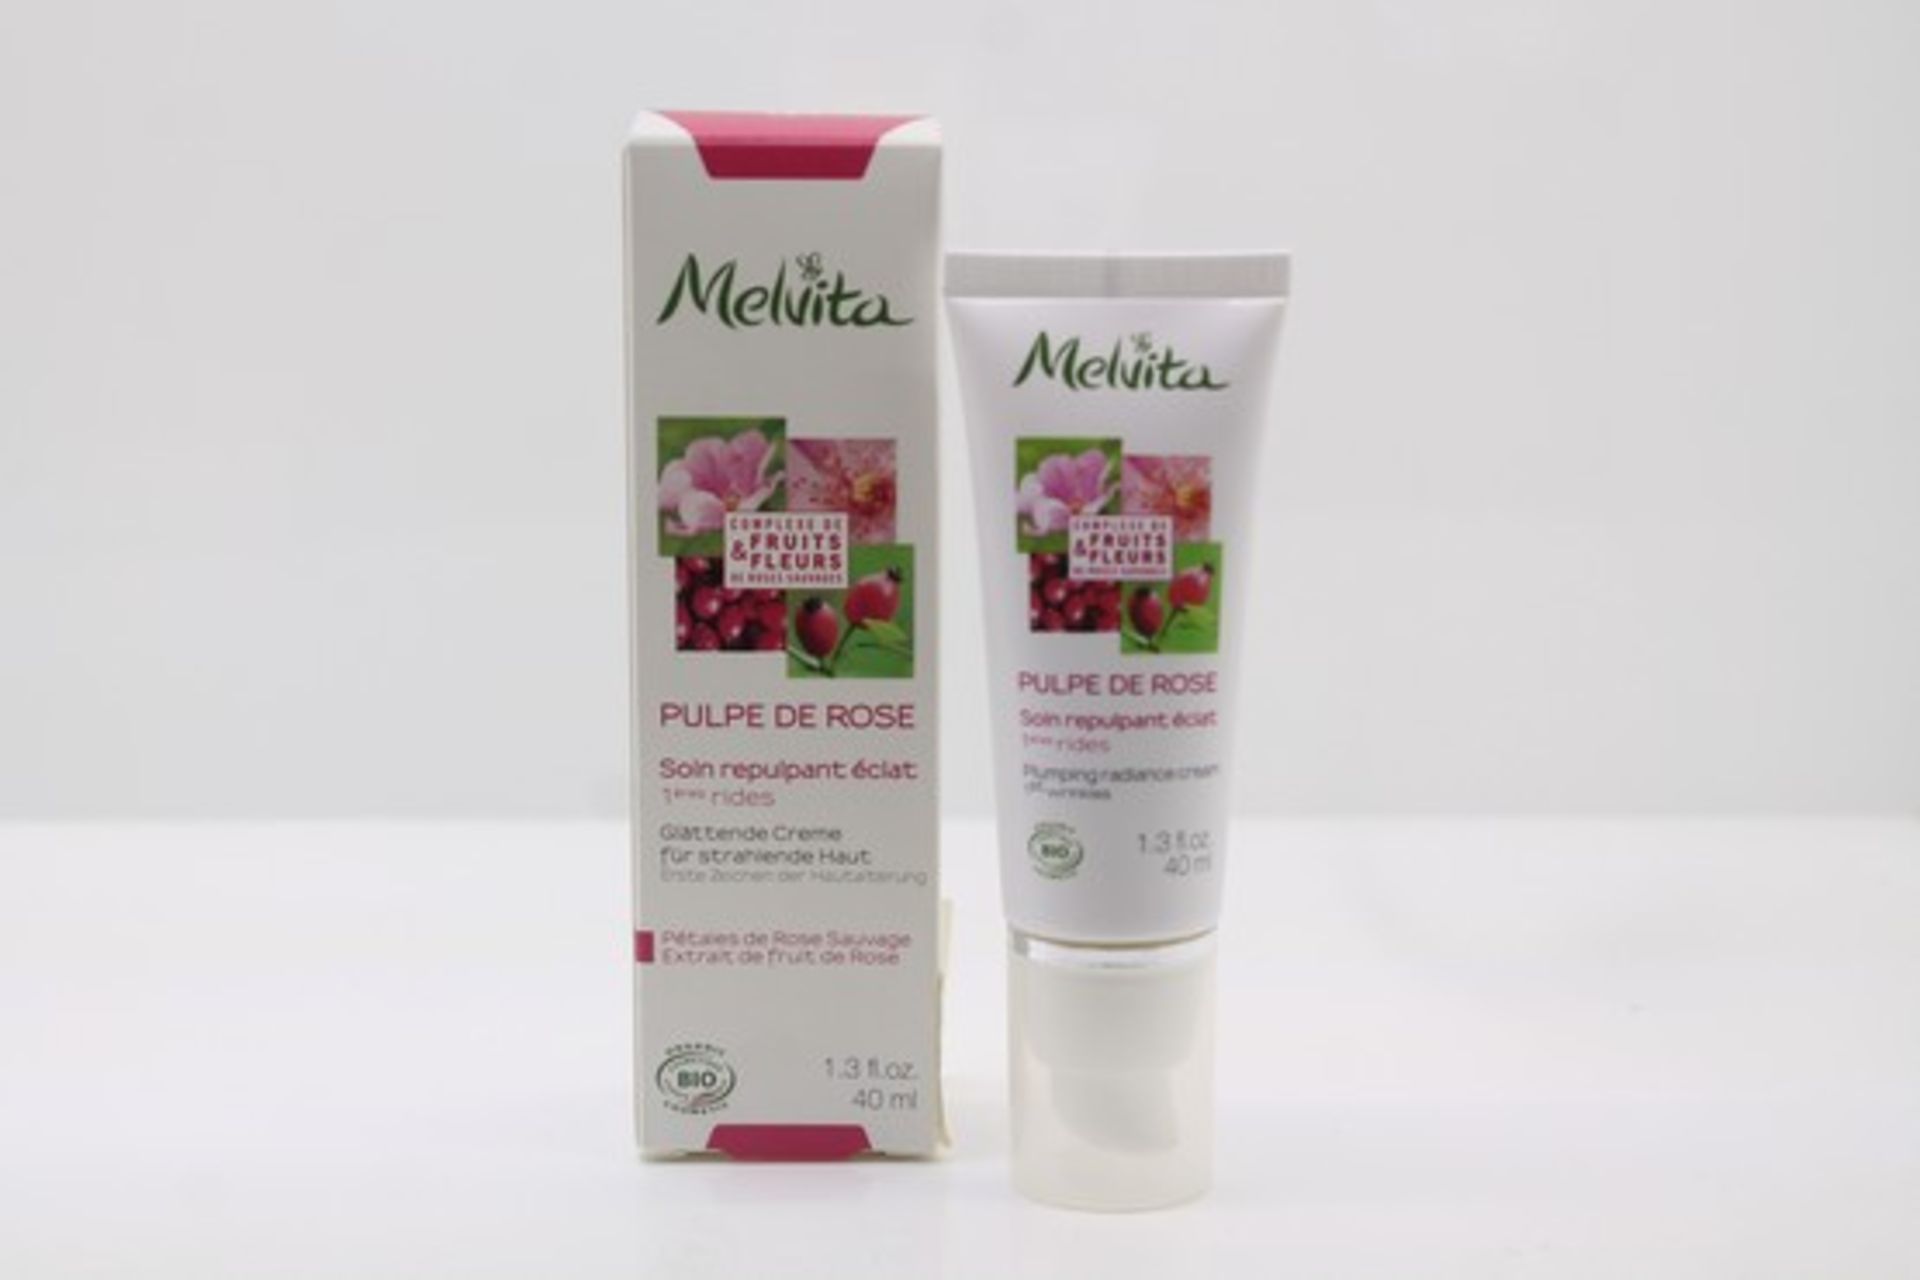 BOXED BRAND NEW MELVITA PULPE DE ROSE PLUMPING RADIANCE CREAM RRP £45 (DSSALVAGE(